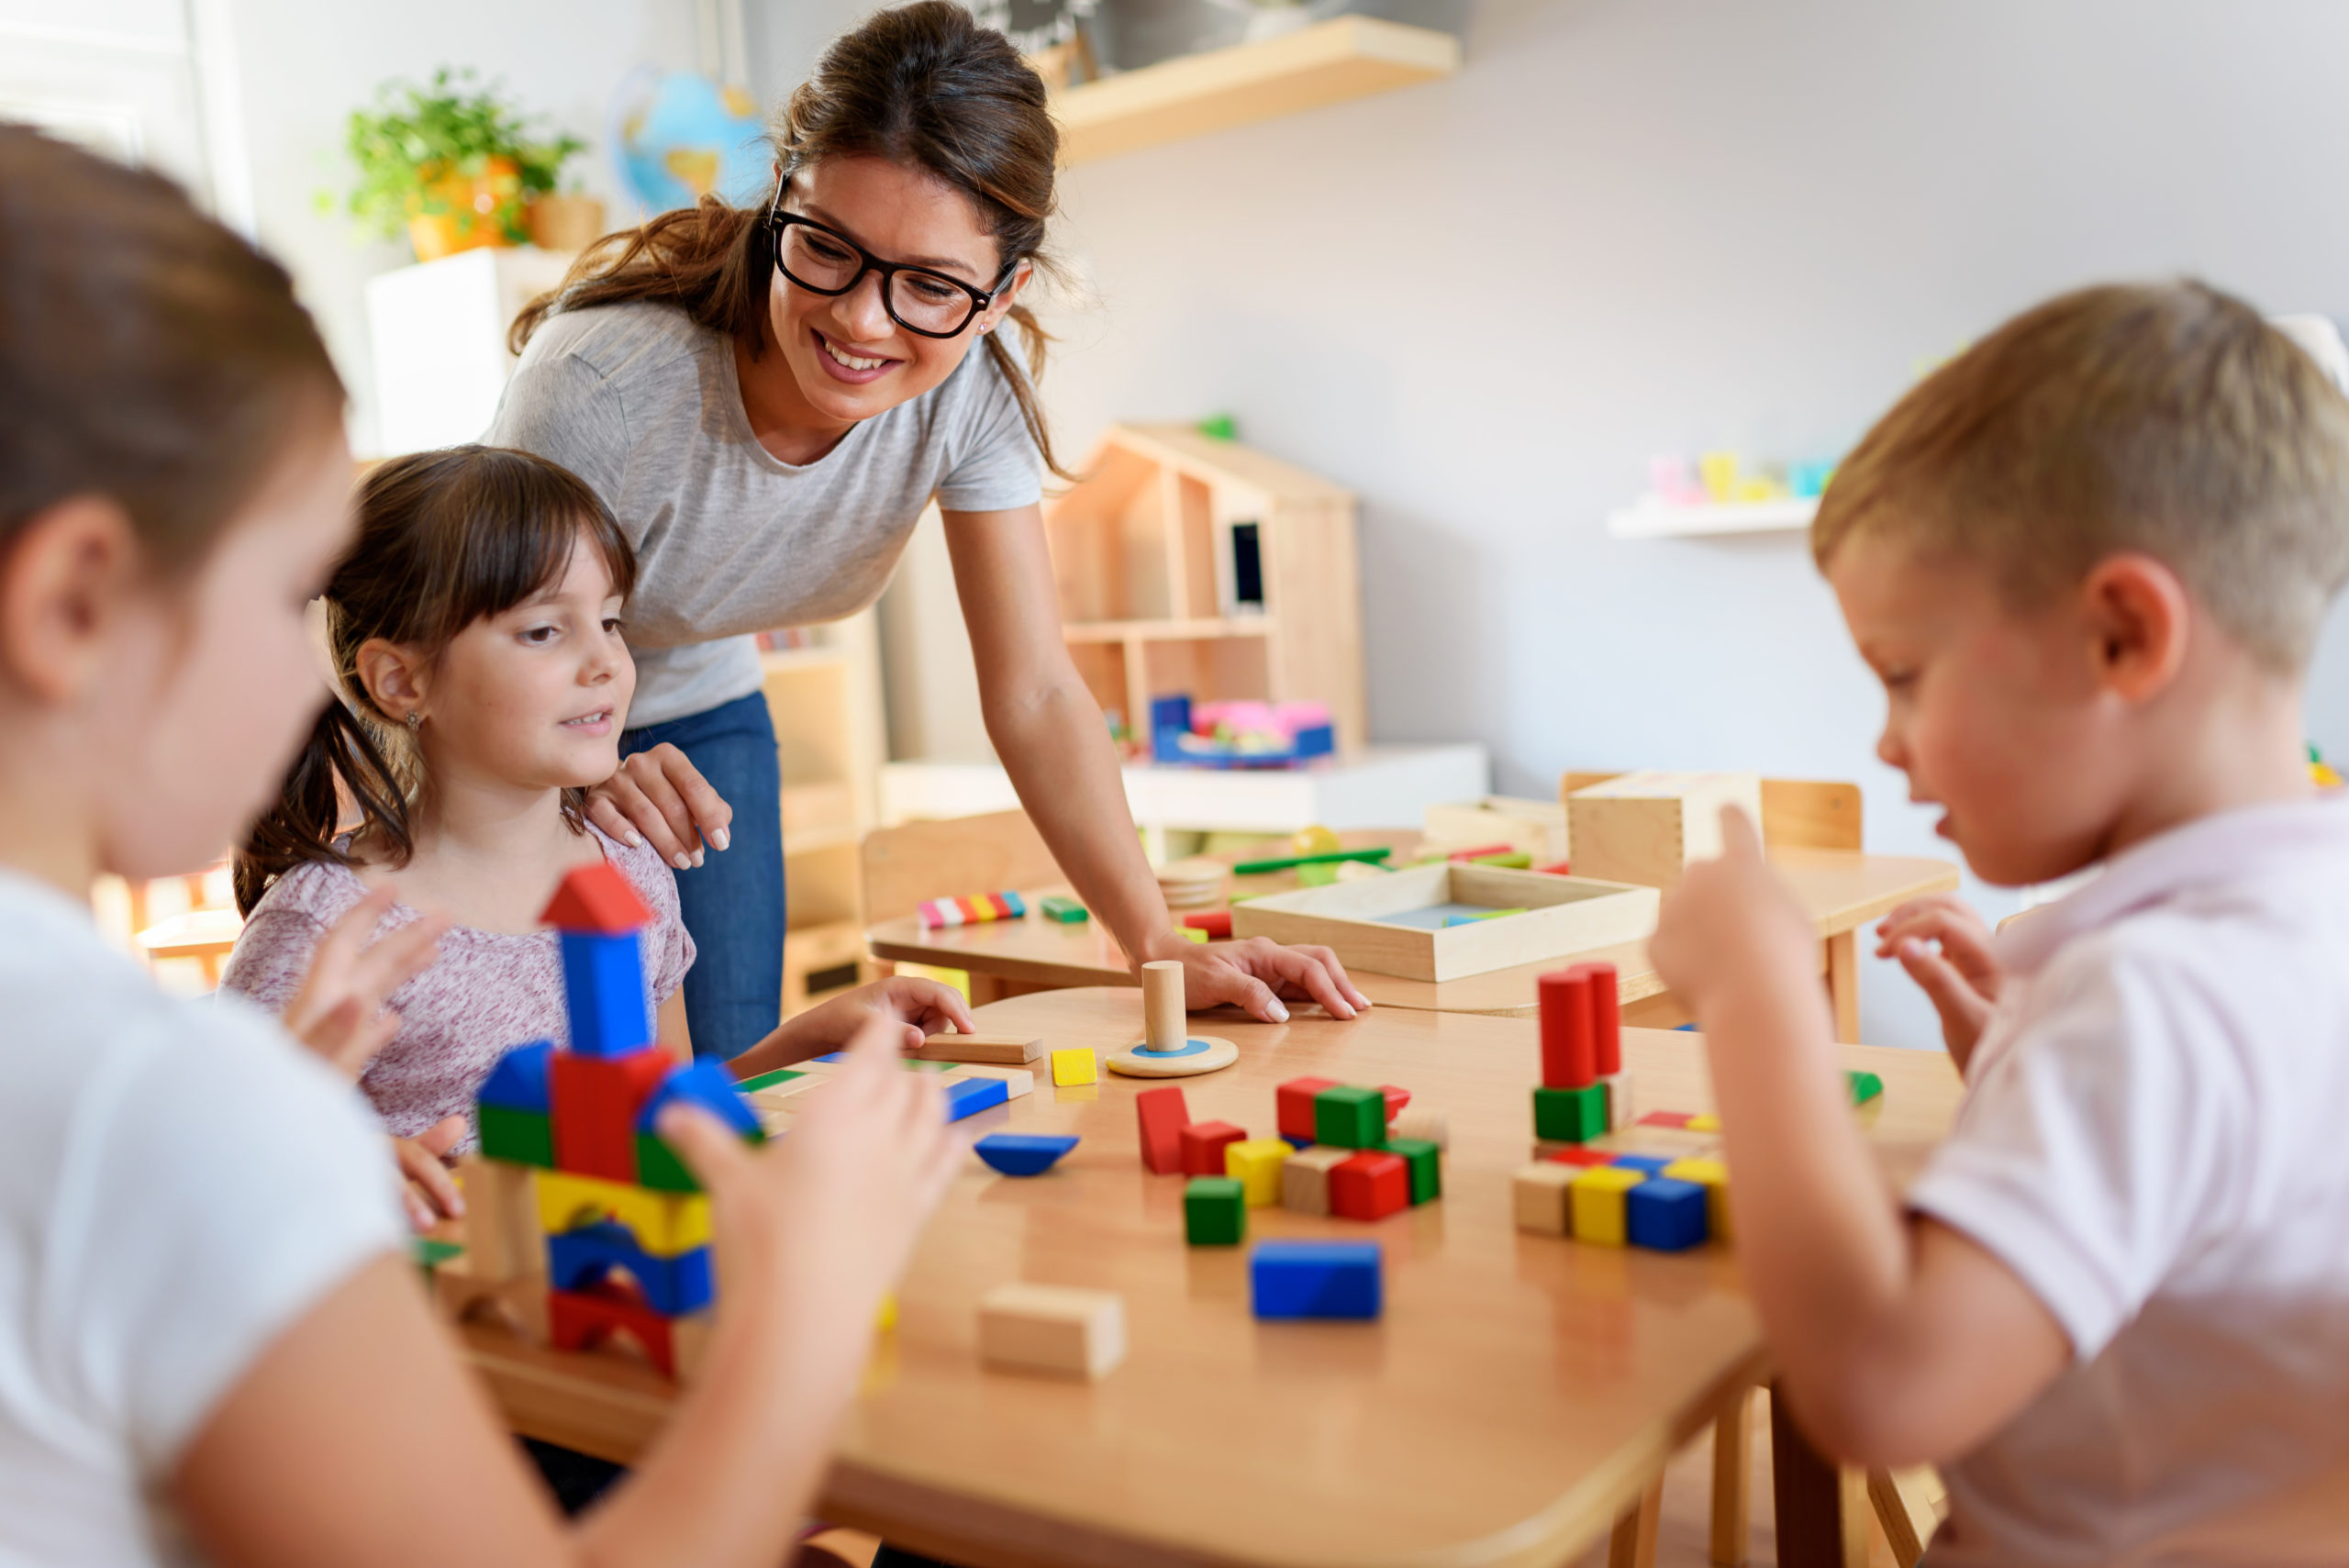 Preschool,Teacher,With,Children,Playing,With,Colorful,Wooden,Didactic,Toys